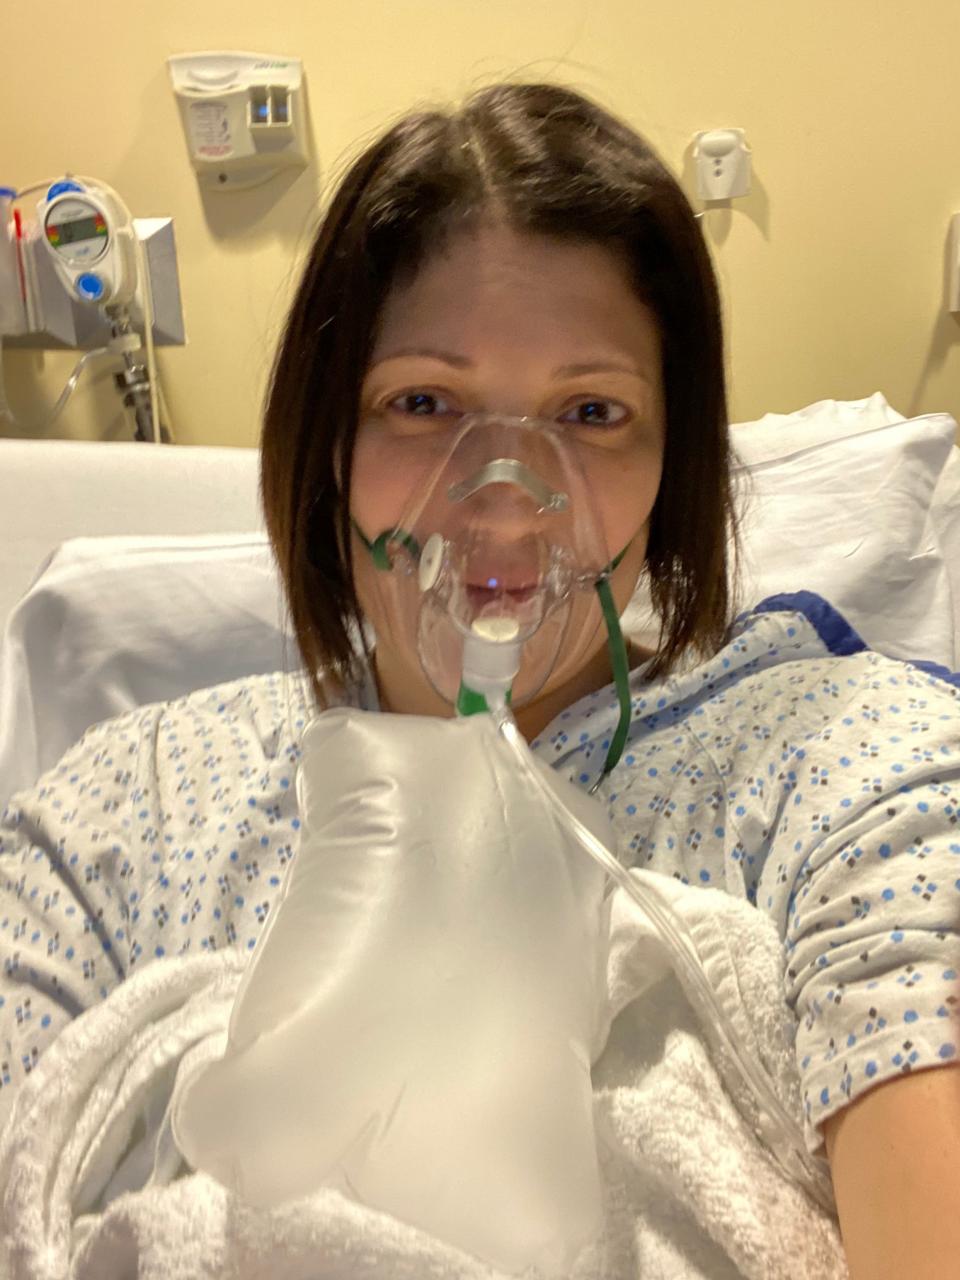 Sofia Burke, 43, of Elmwood Park, uses a non-rebreather mask to deliver high concentrations of oxygen while hospitalized with COVID on Nov. 25, 2020.